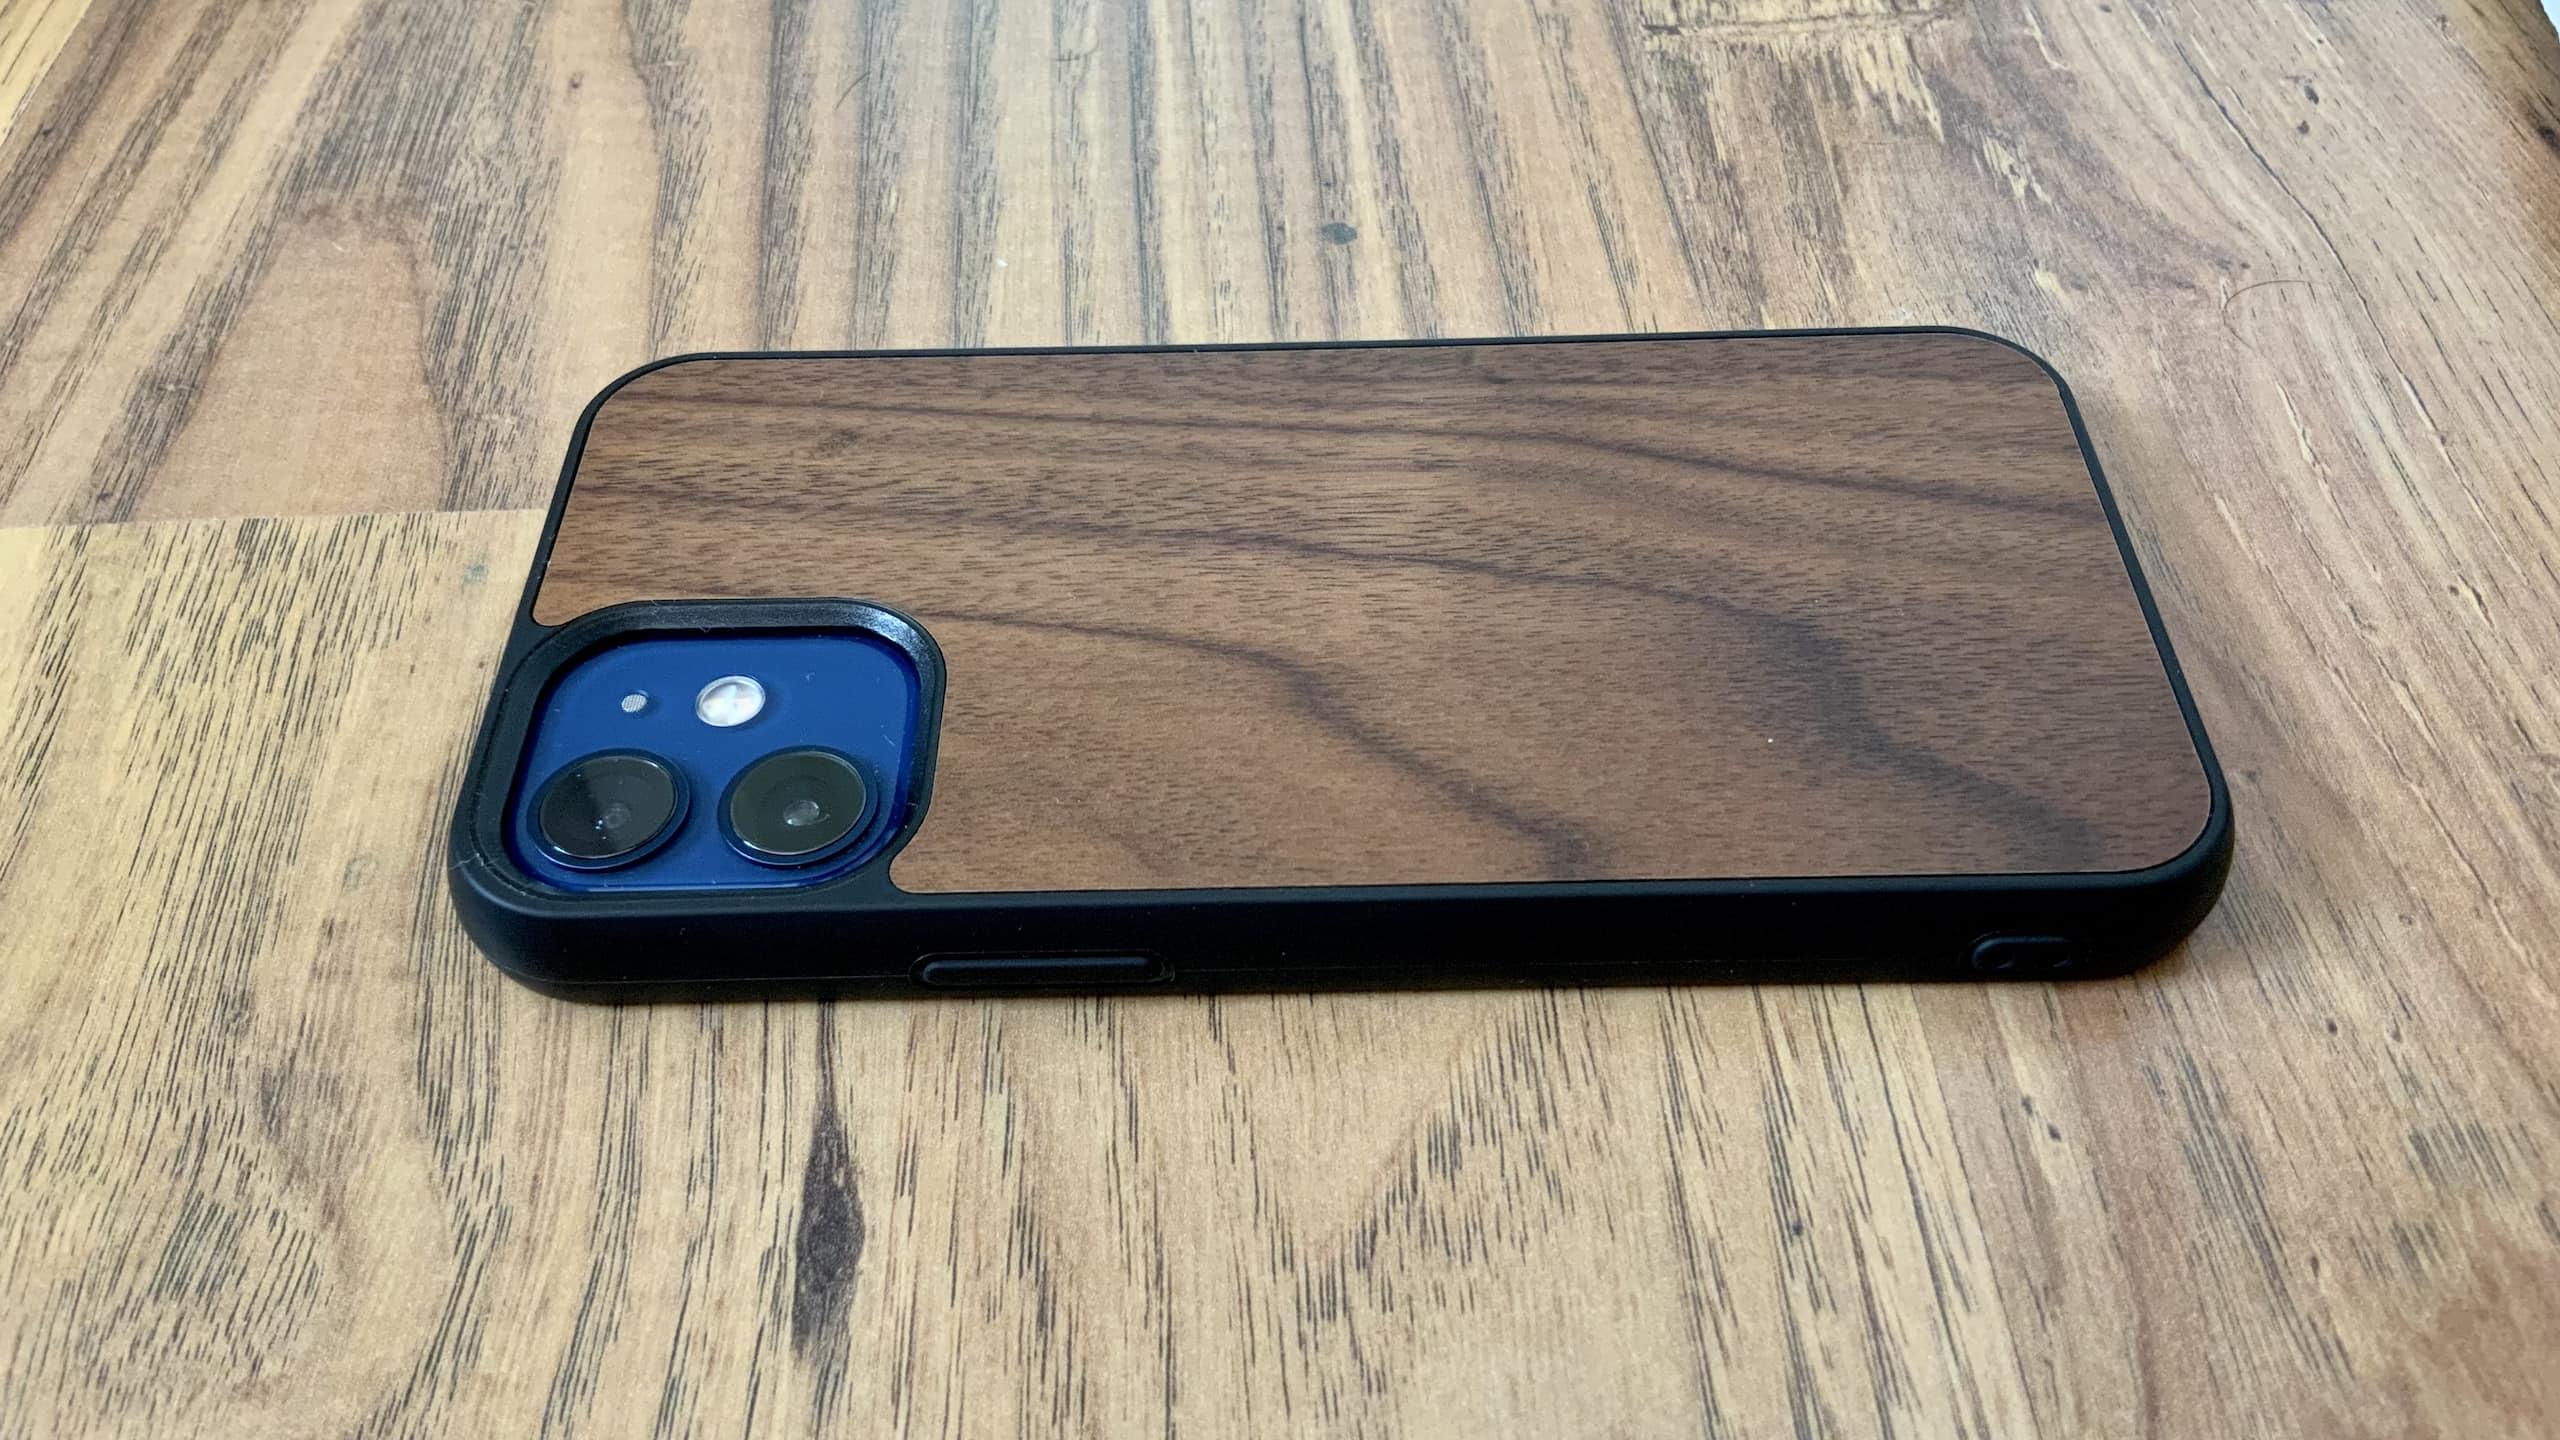 Wooden Bumper for iPhone 12 review